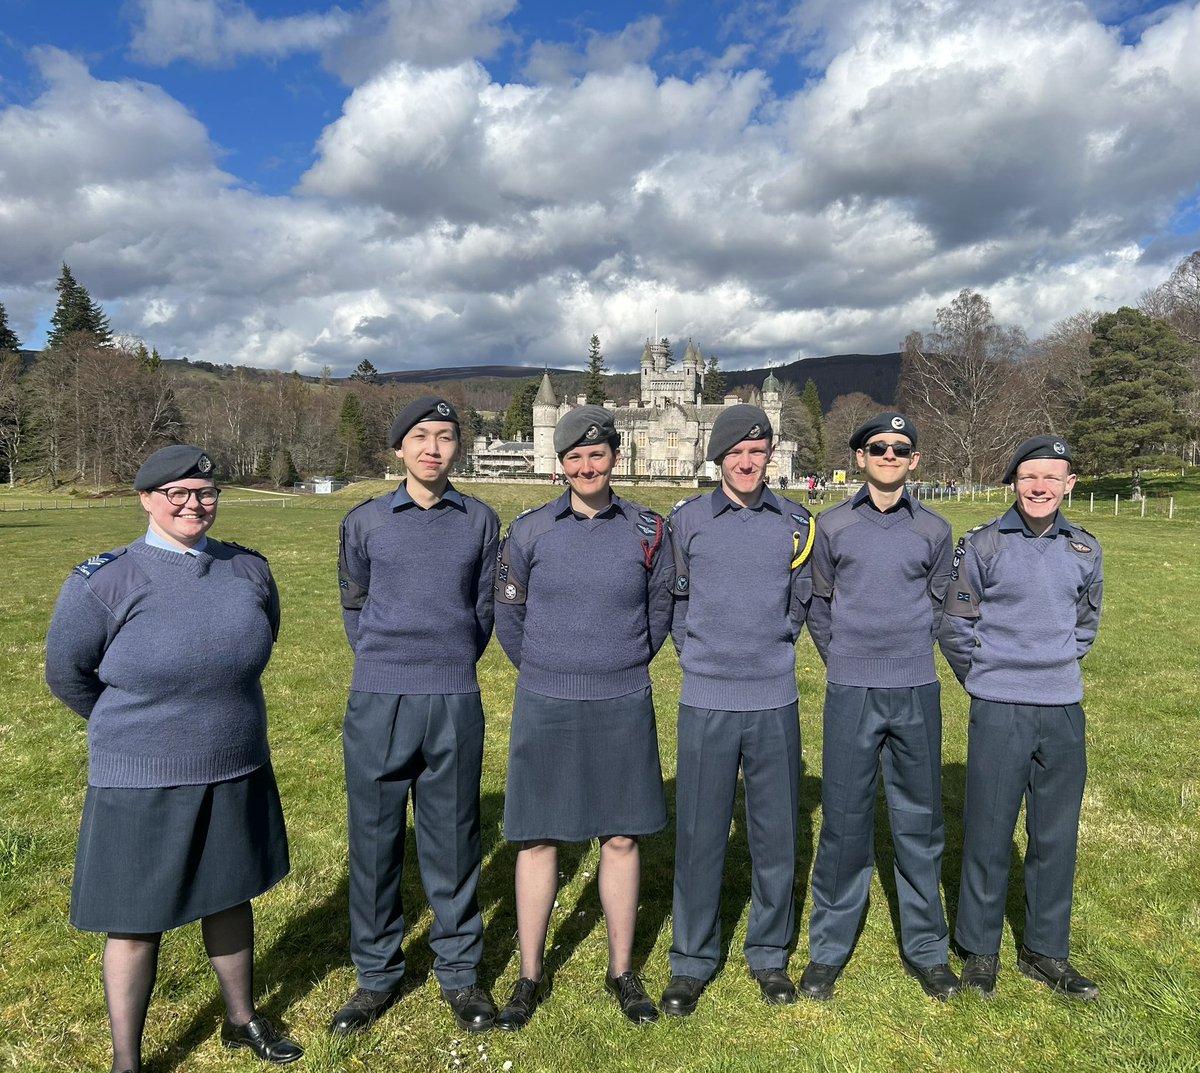 Yesterday saw 5 Cadets and a CFAV from #Team102 attend Day 1 of the Balmoral Road Races held on the Balmoral Estate.

This sees Cadets using their radio skills to carry out marshalling duties as well as providing much needed morale and encouragement to runners 🎽

Well done!